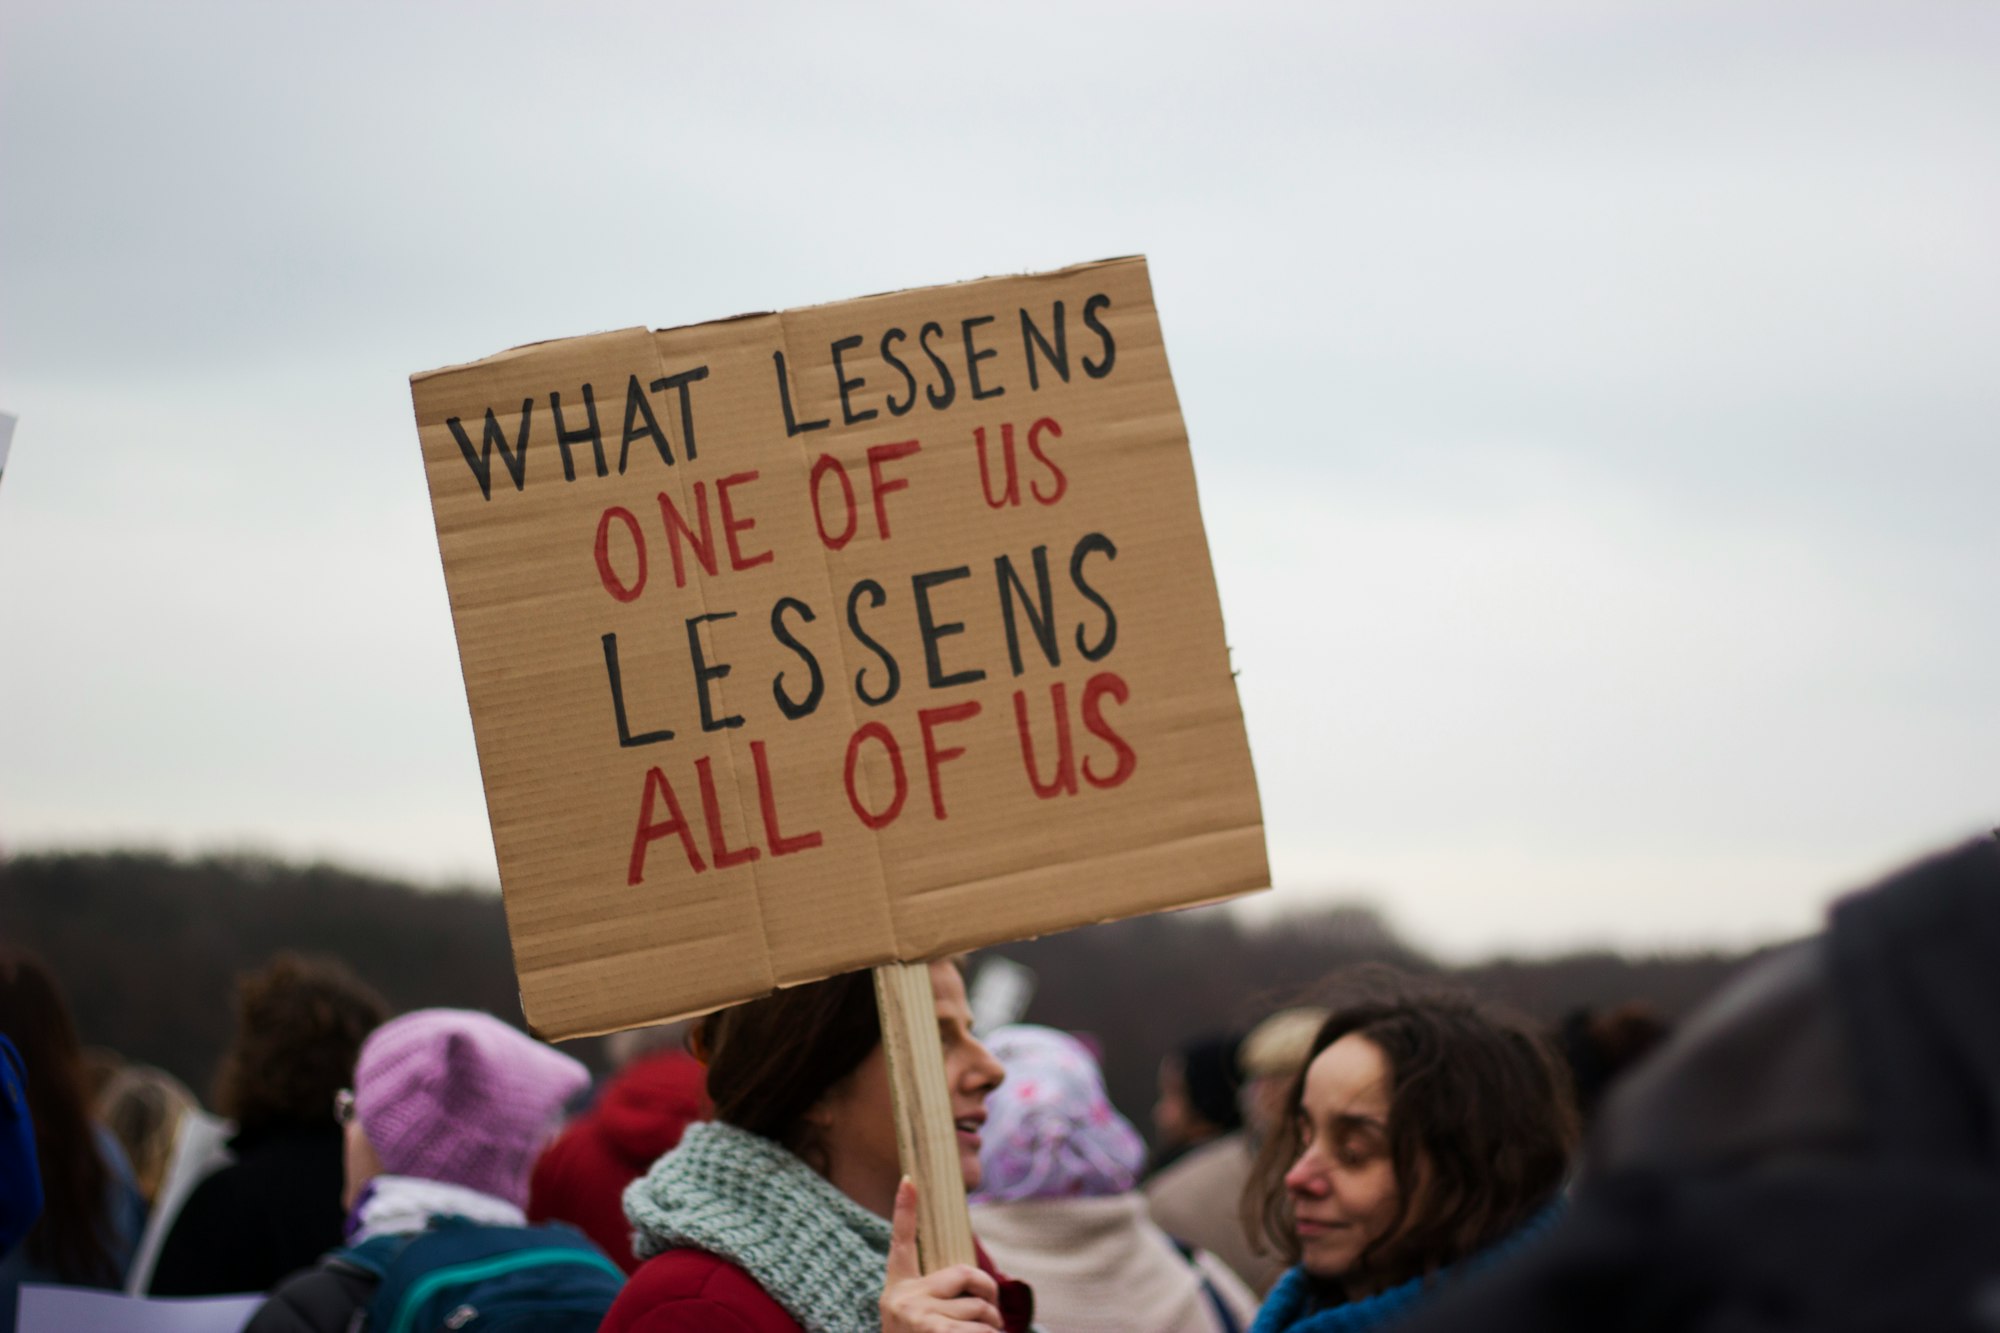 Women in protest holding sign saying what lessons one of us, lessons all of us